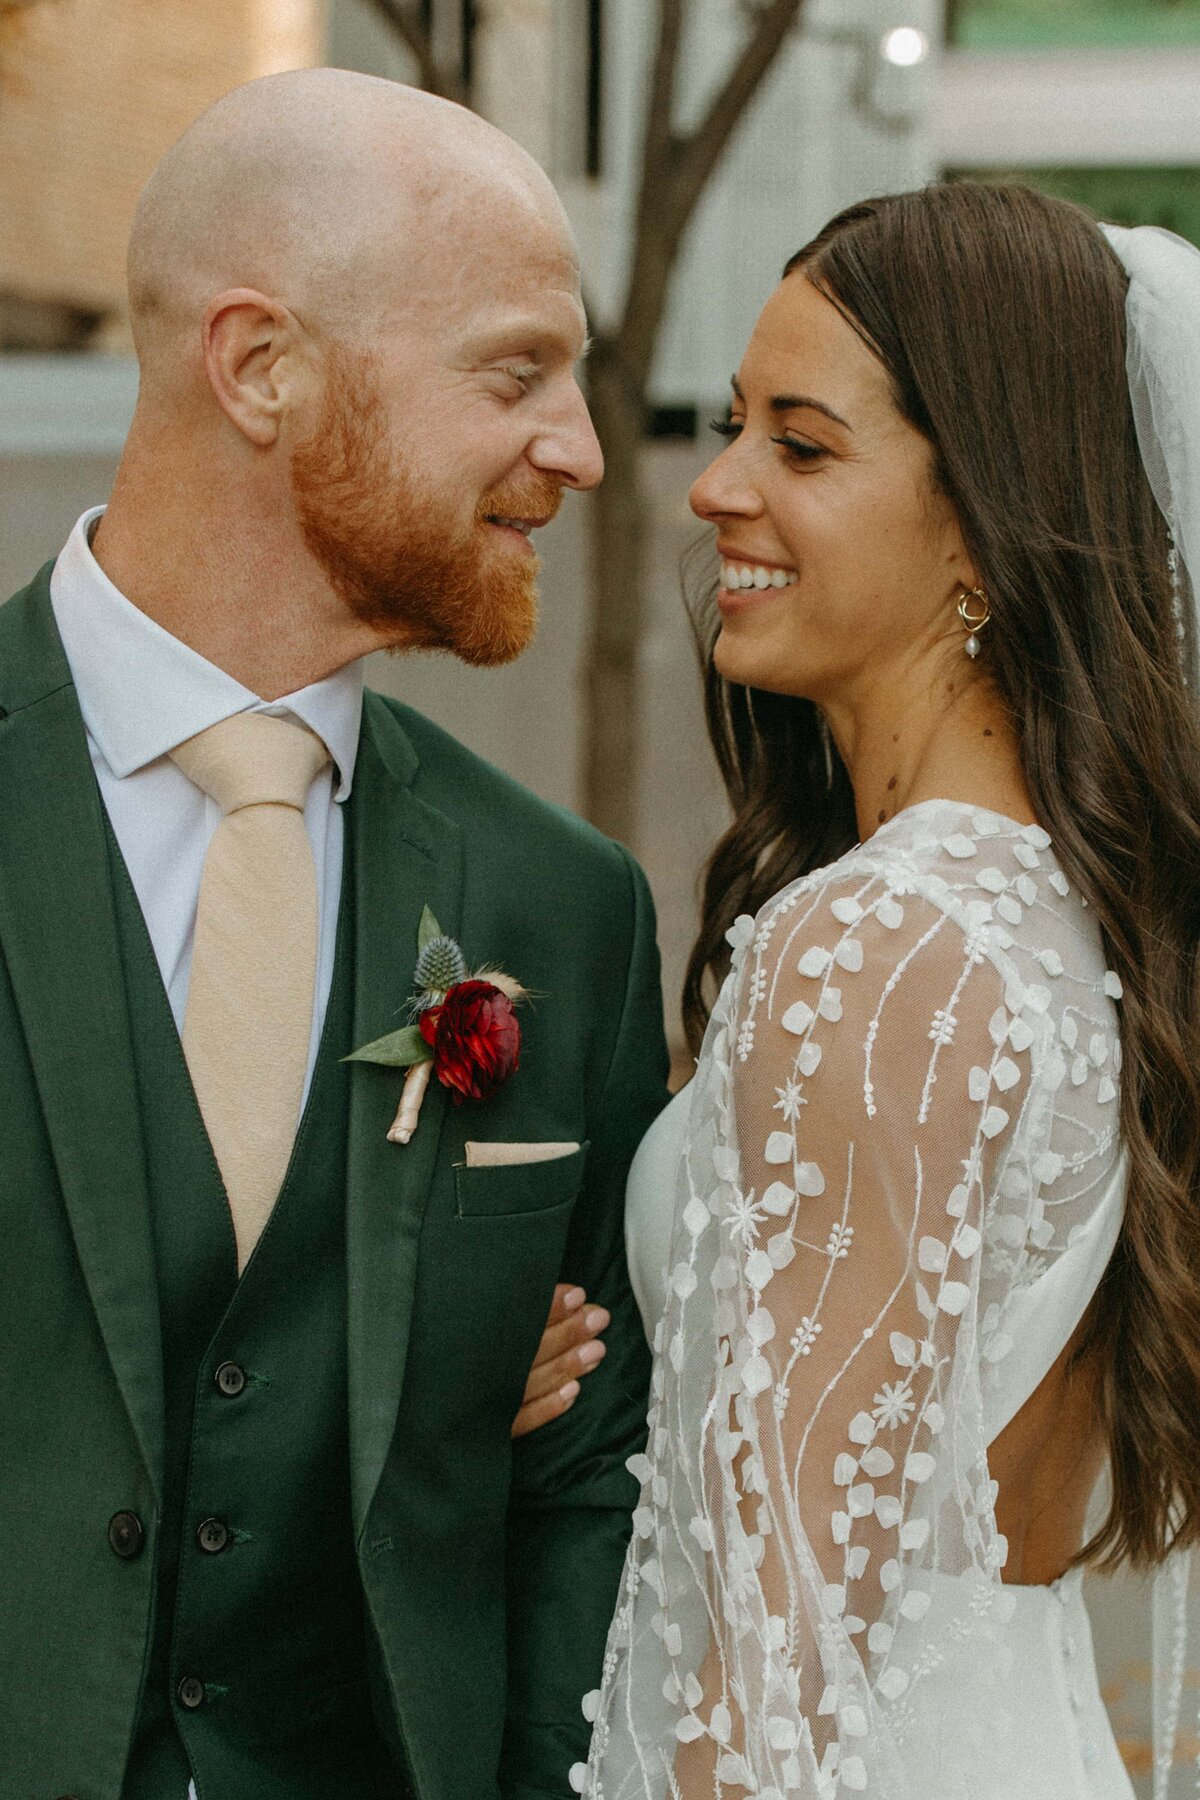 A bride and groom smiling at each other in a park, the bride in a detailed lace dress and the groom in a green suit with a red boutonniere.